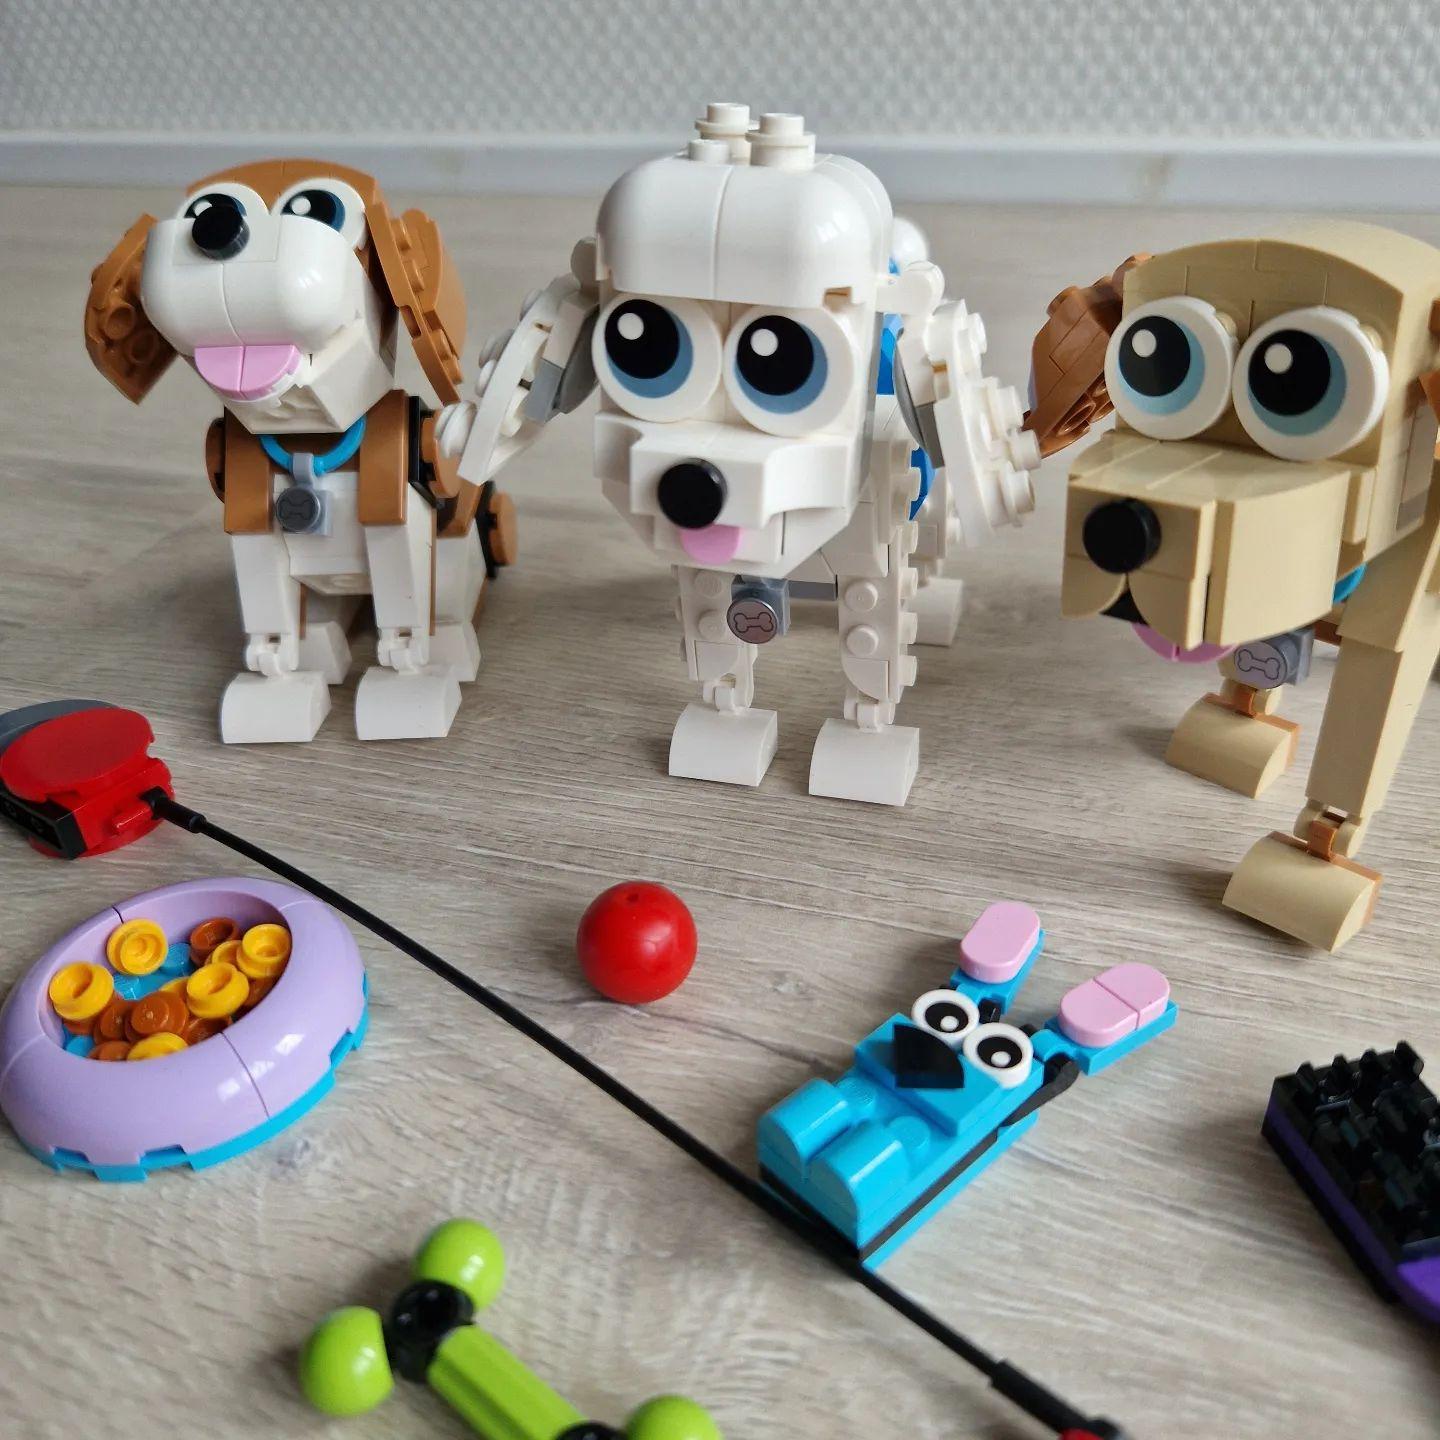 LEGO Creator 3 in 1 Adorable Dogs Animal Figures Toys 31137